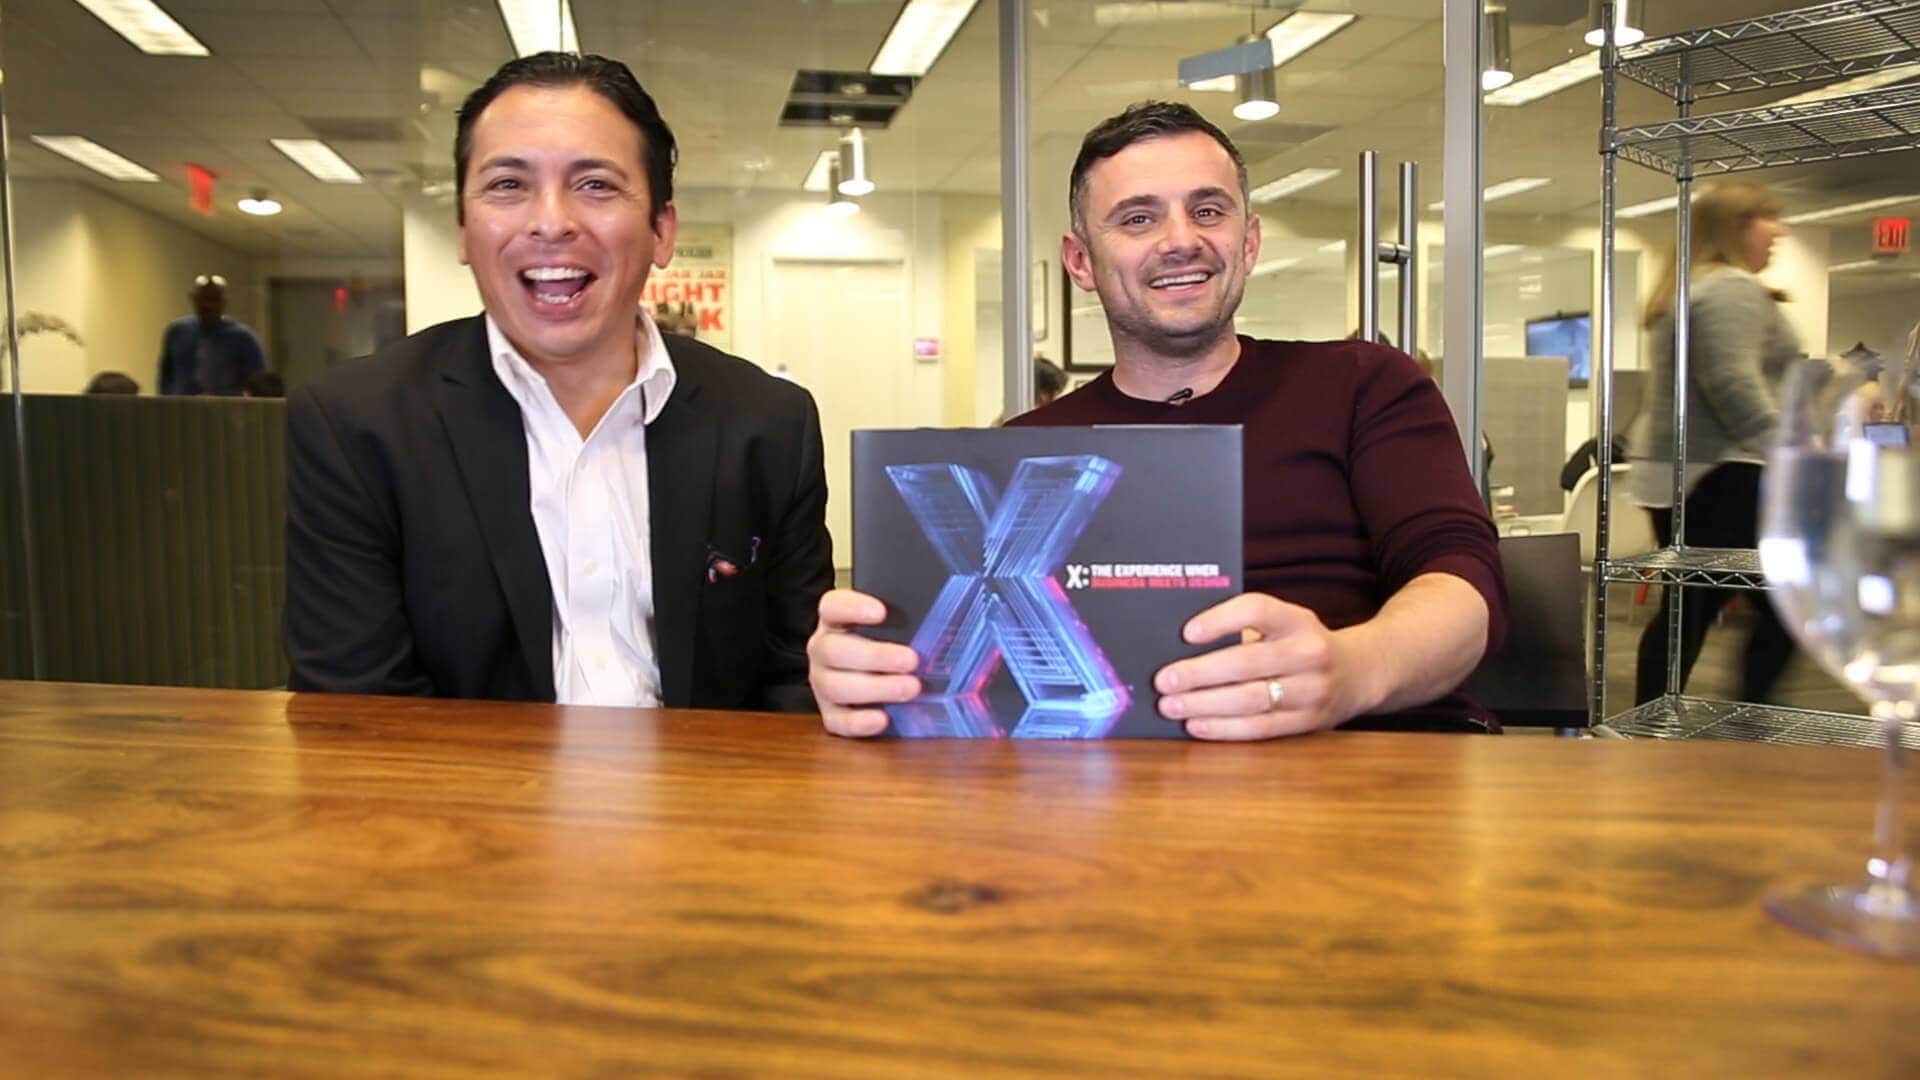 #AskGaryVee Episode 162: My Friend Brian Solis Answers Questions on the Show